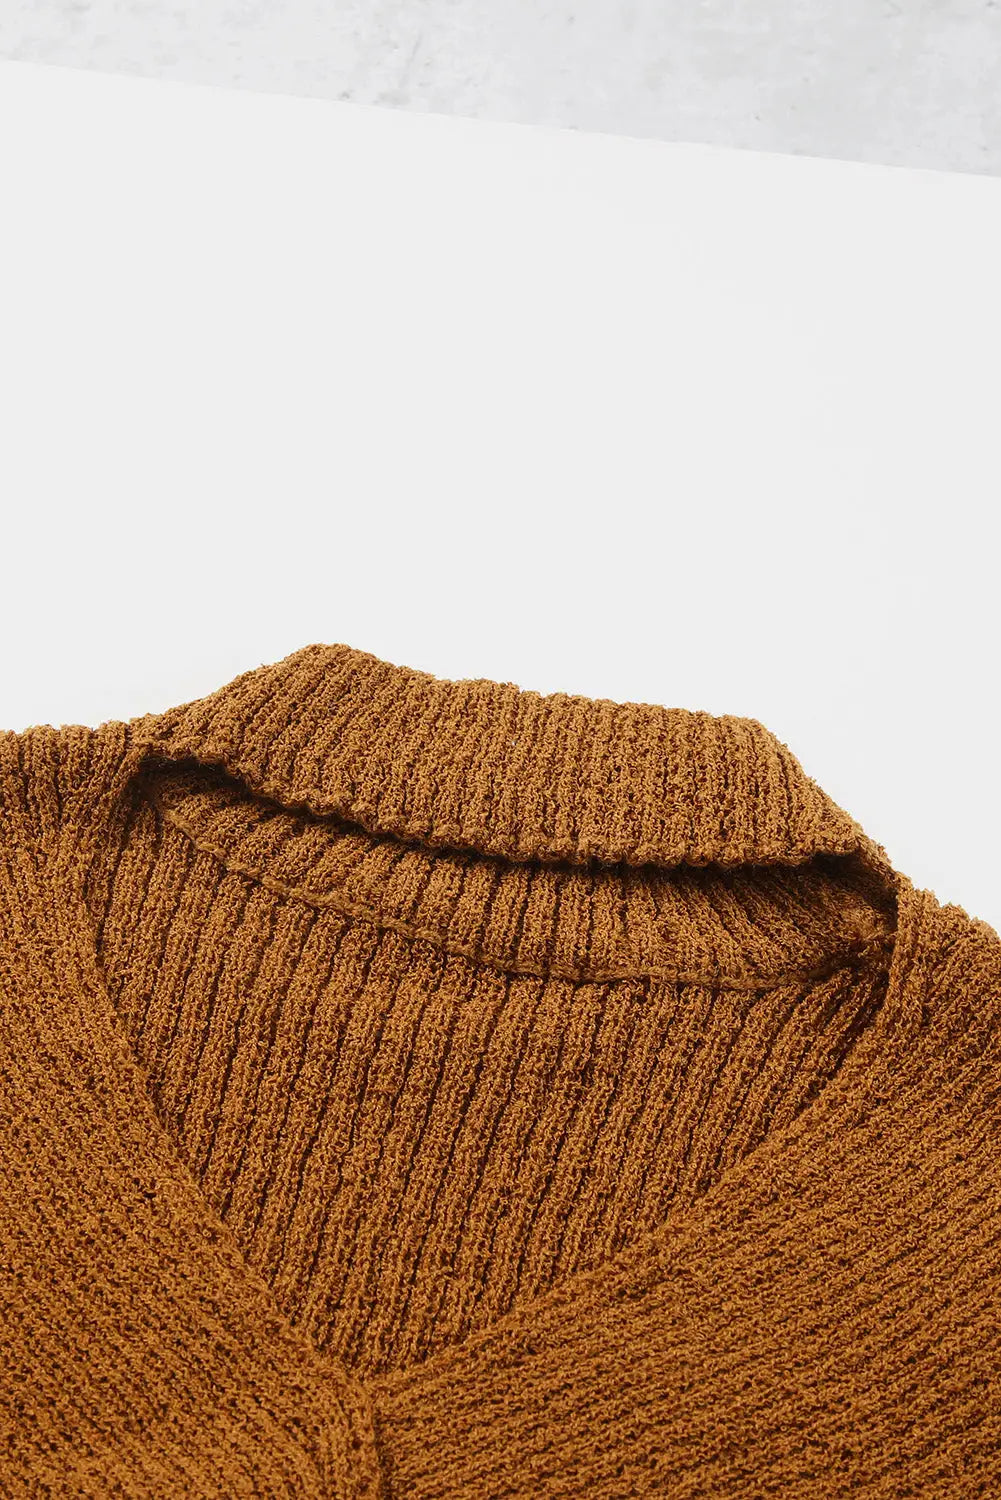 Khaki high neck hollow-out crossed wrap knit sweater - sweaters & cardigans